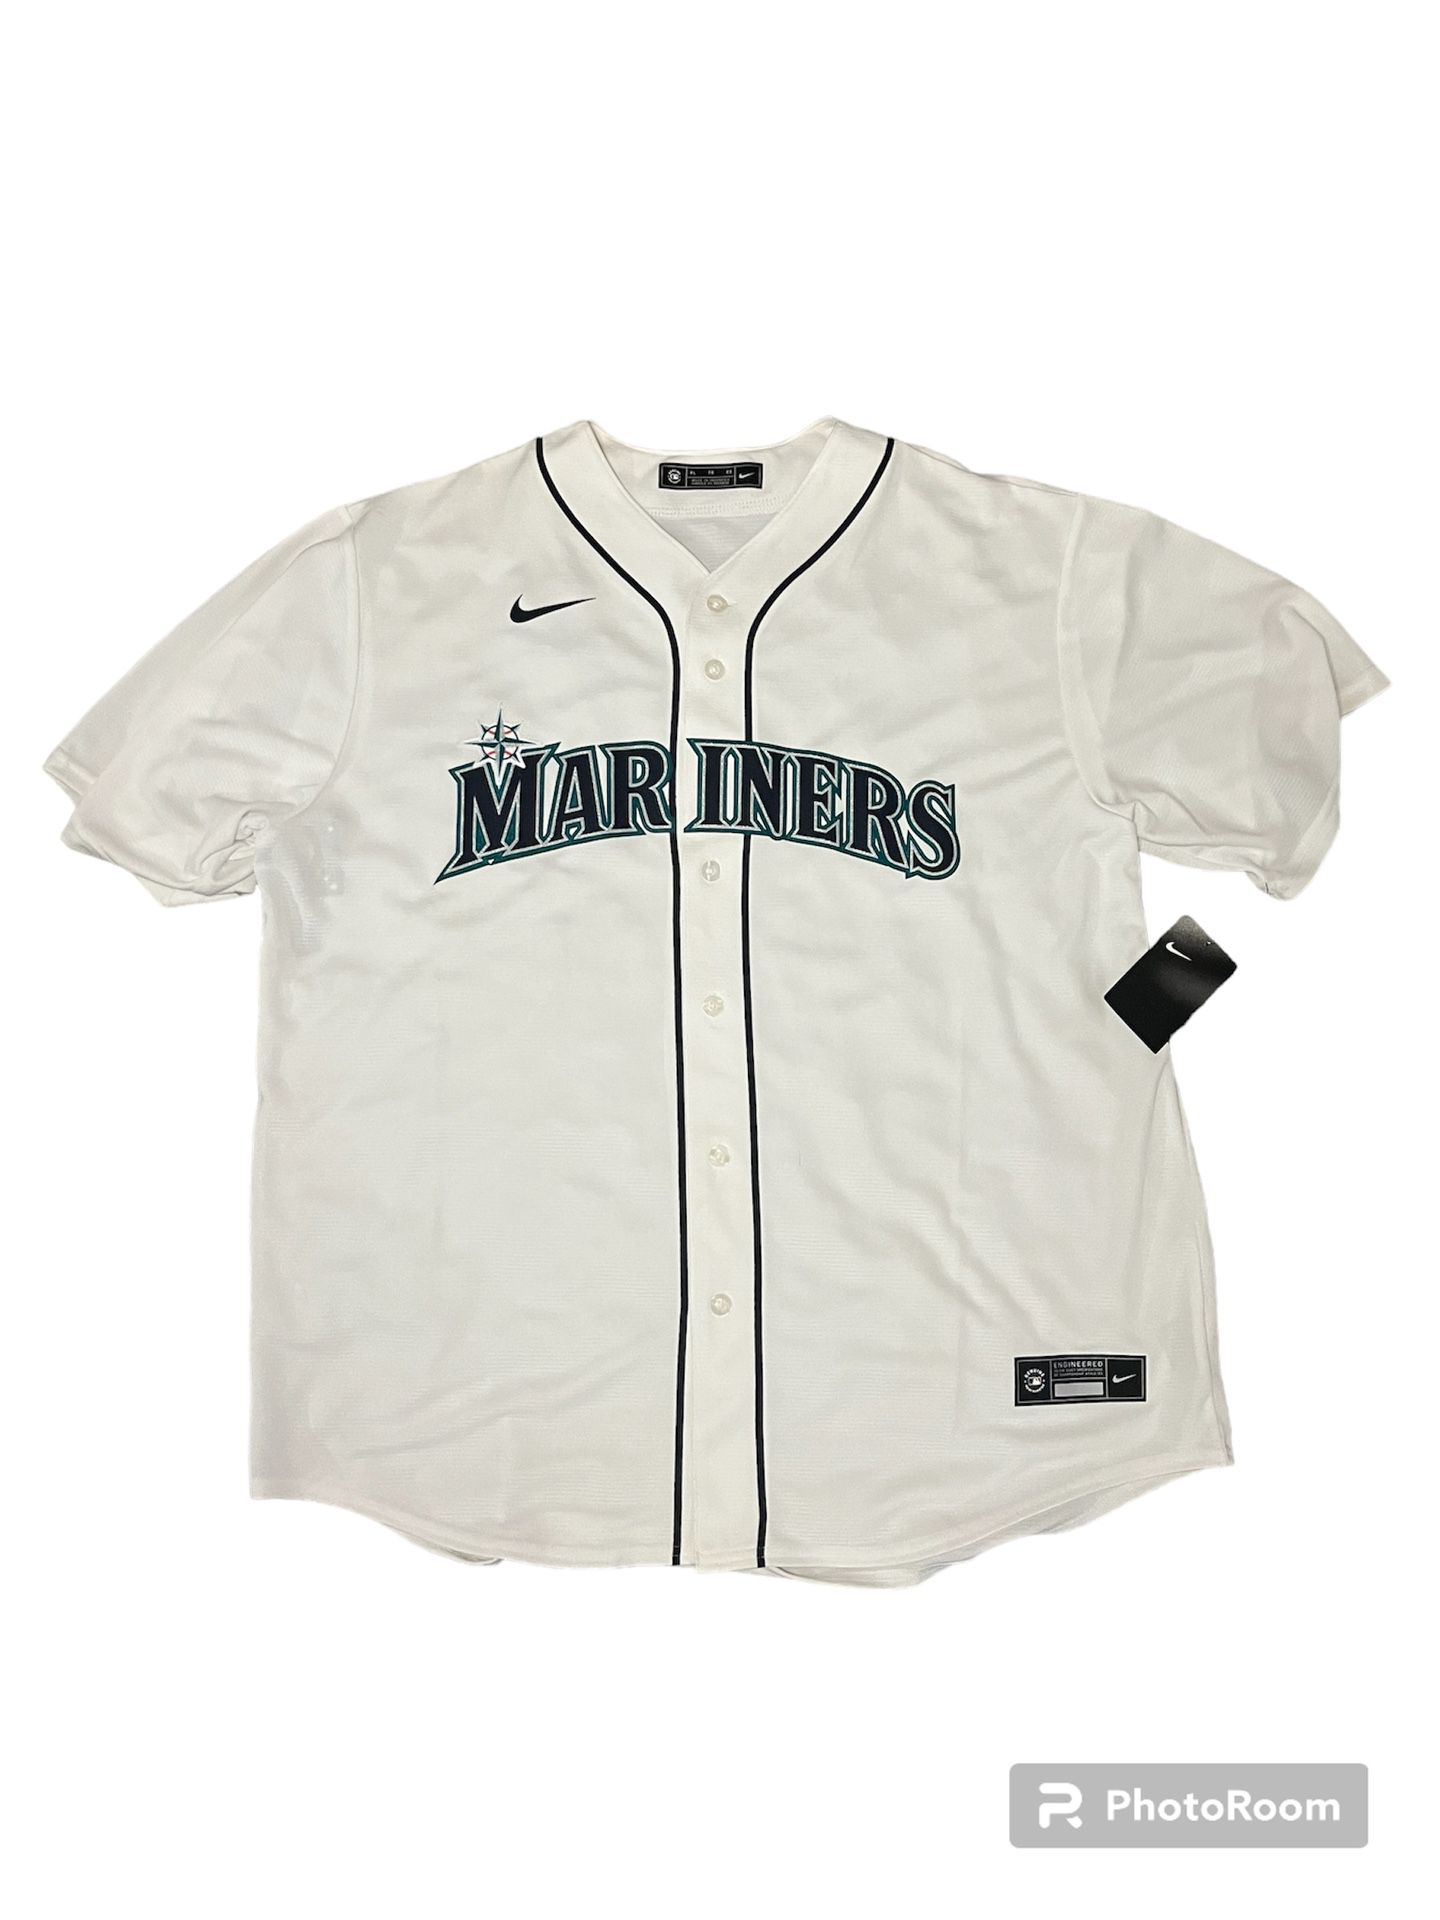 Nike Seattle Mariners Jersey Men's XL White Button Front Home Blank MLB Baseball